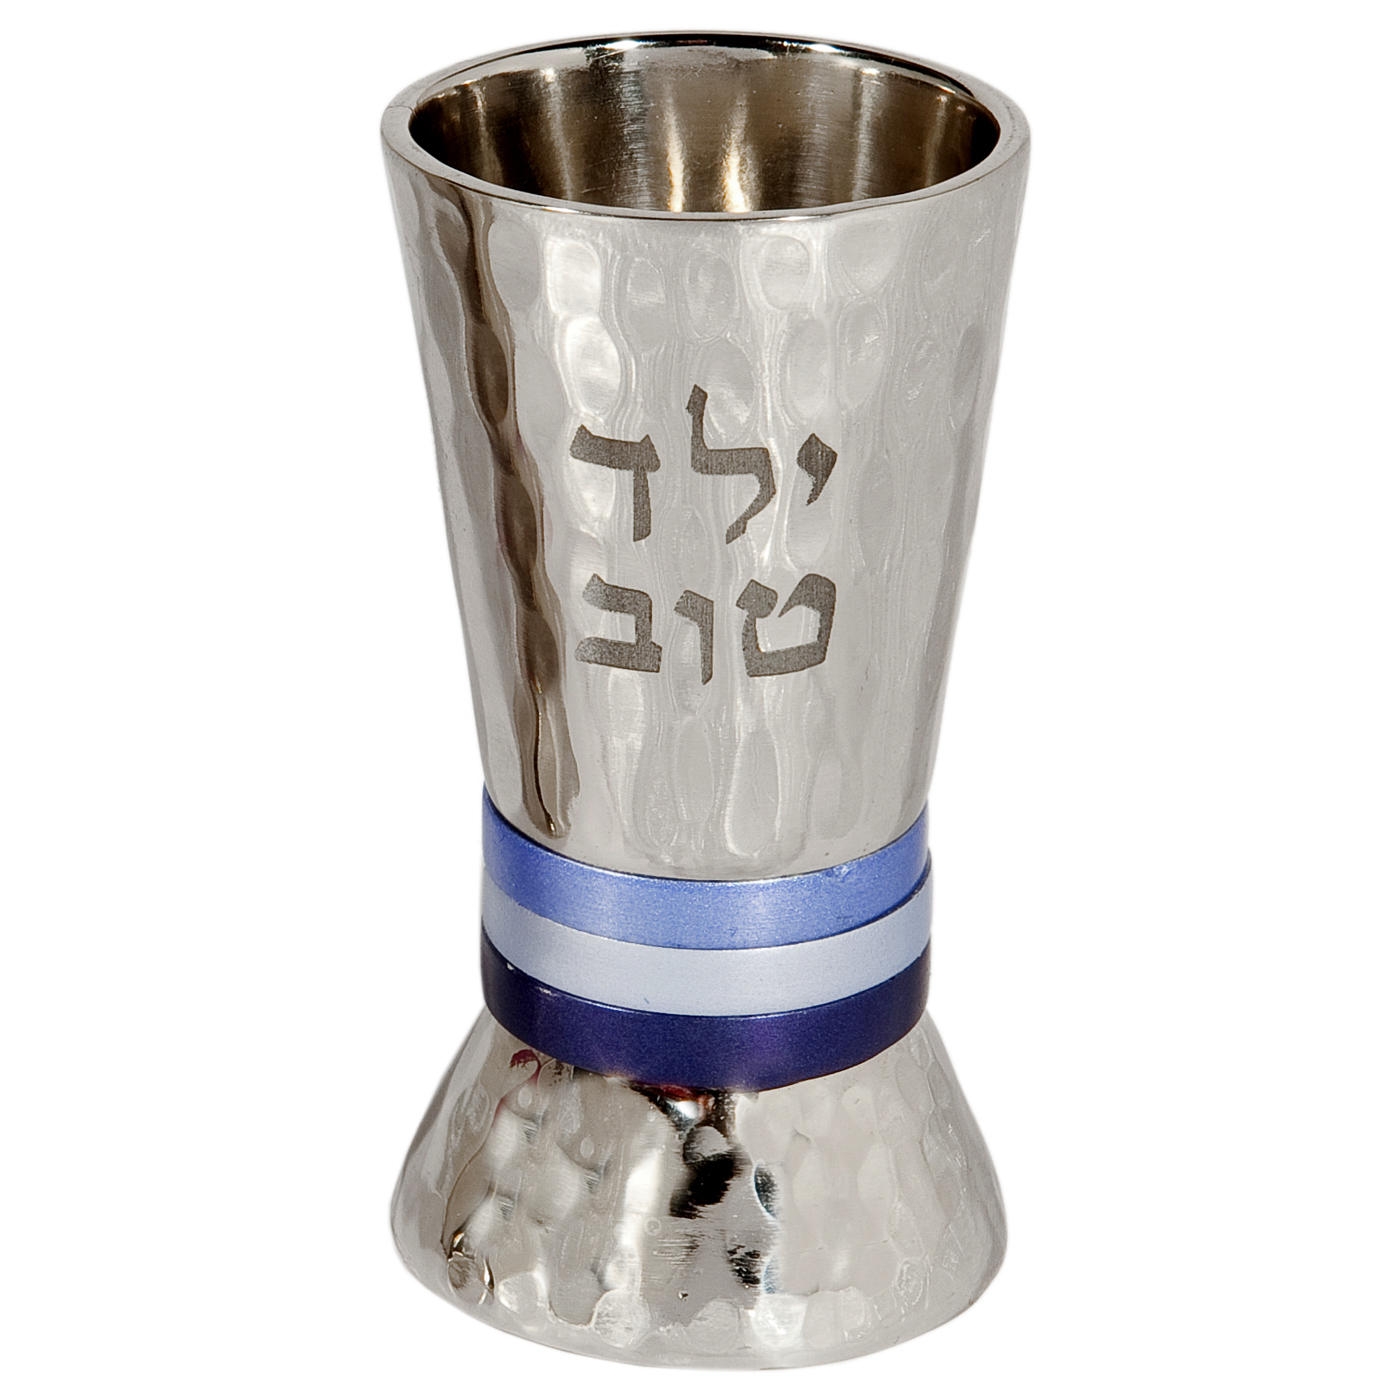 Yair Emanuel Hammered Nickel Children's Kiddush Cup - Silver with Colored Rings (Choice of Colors) - 1